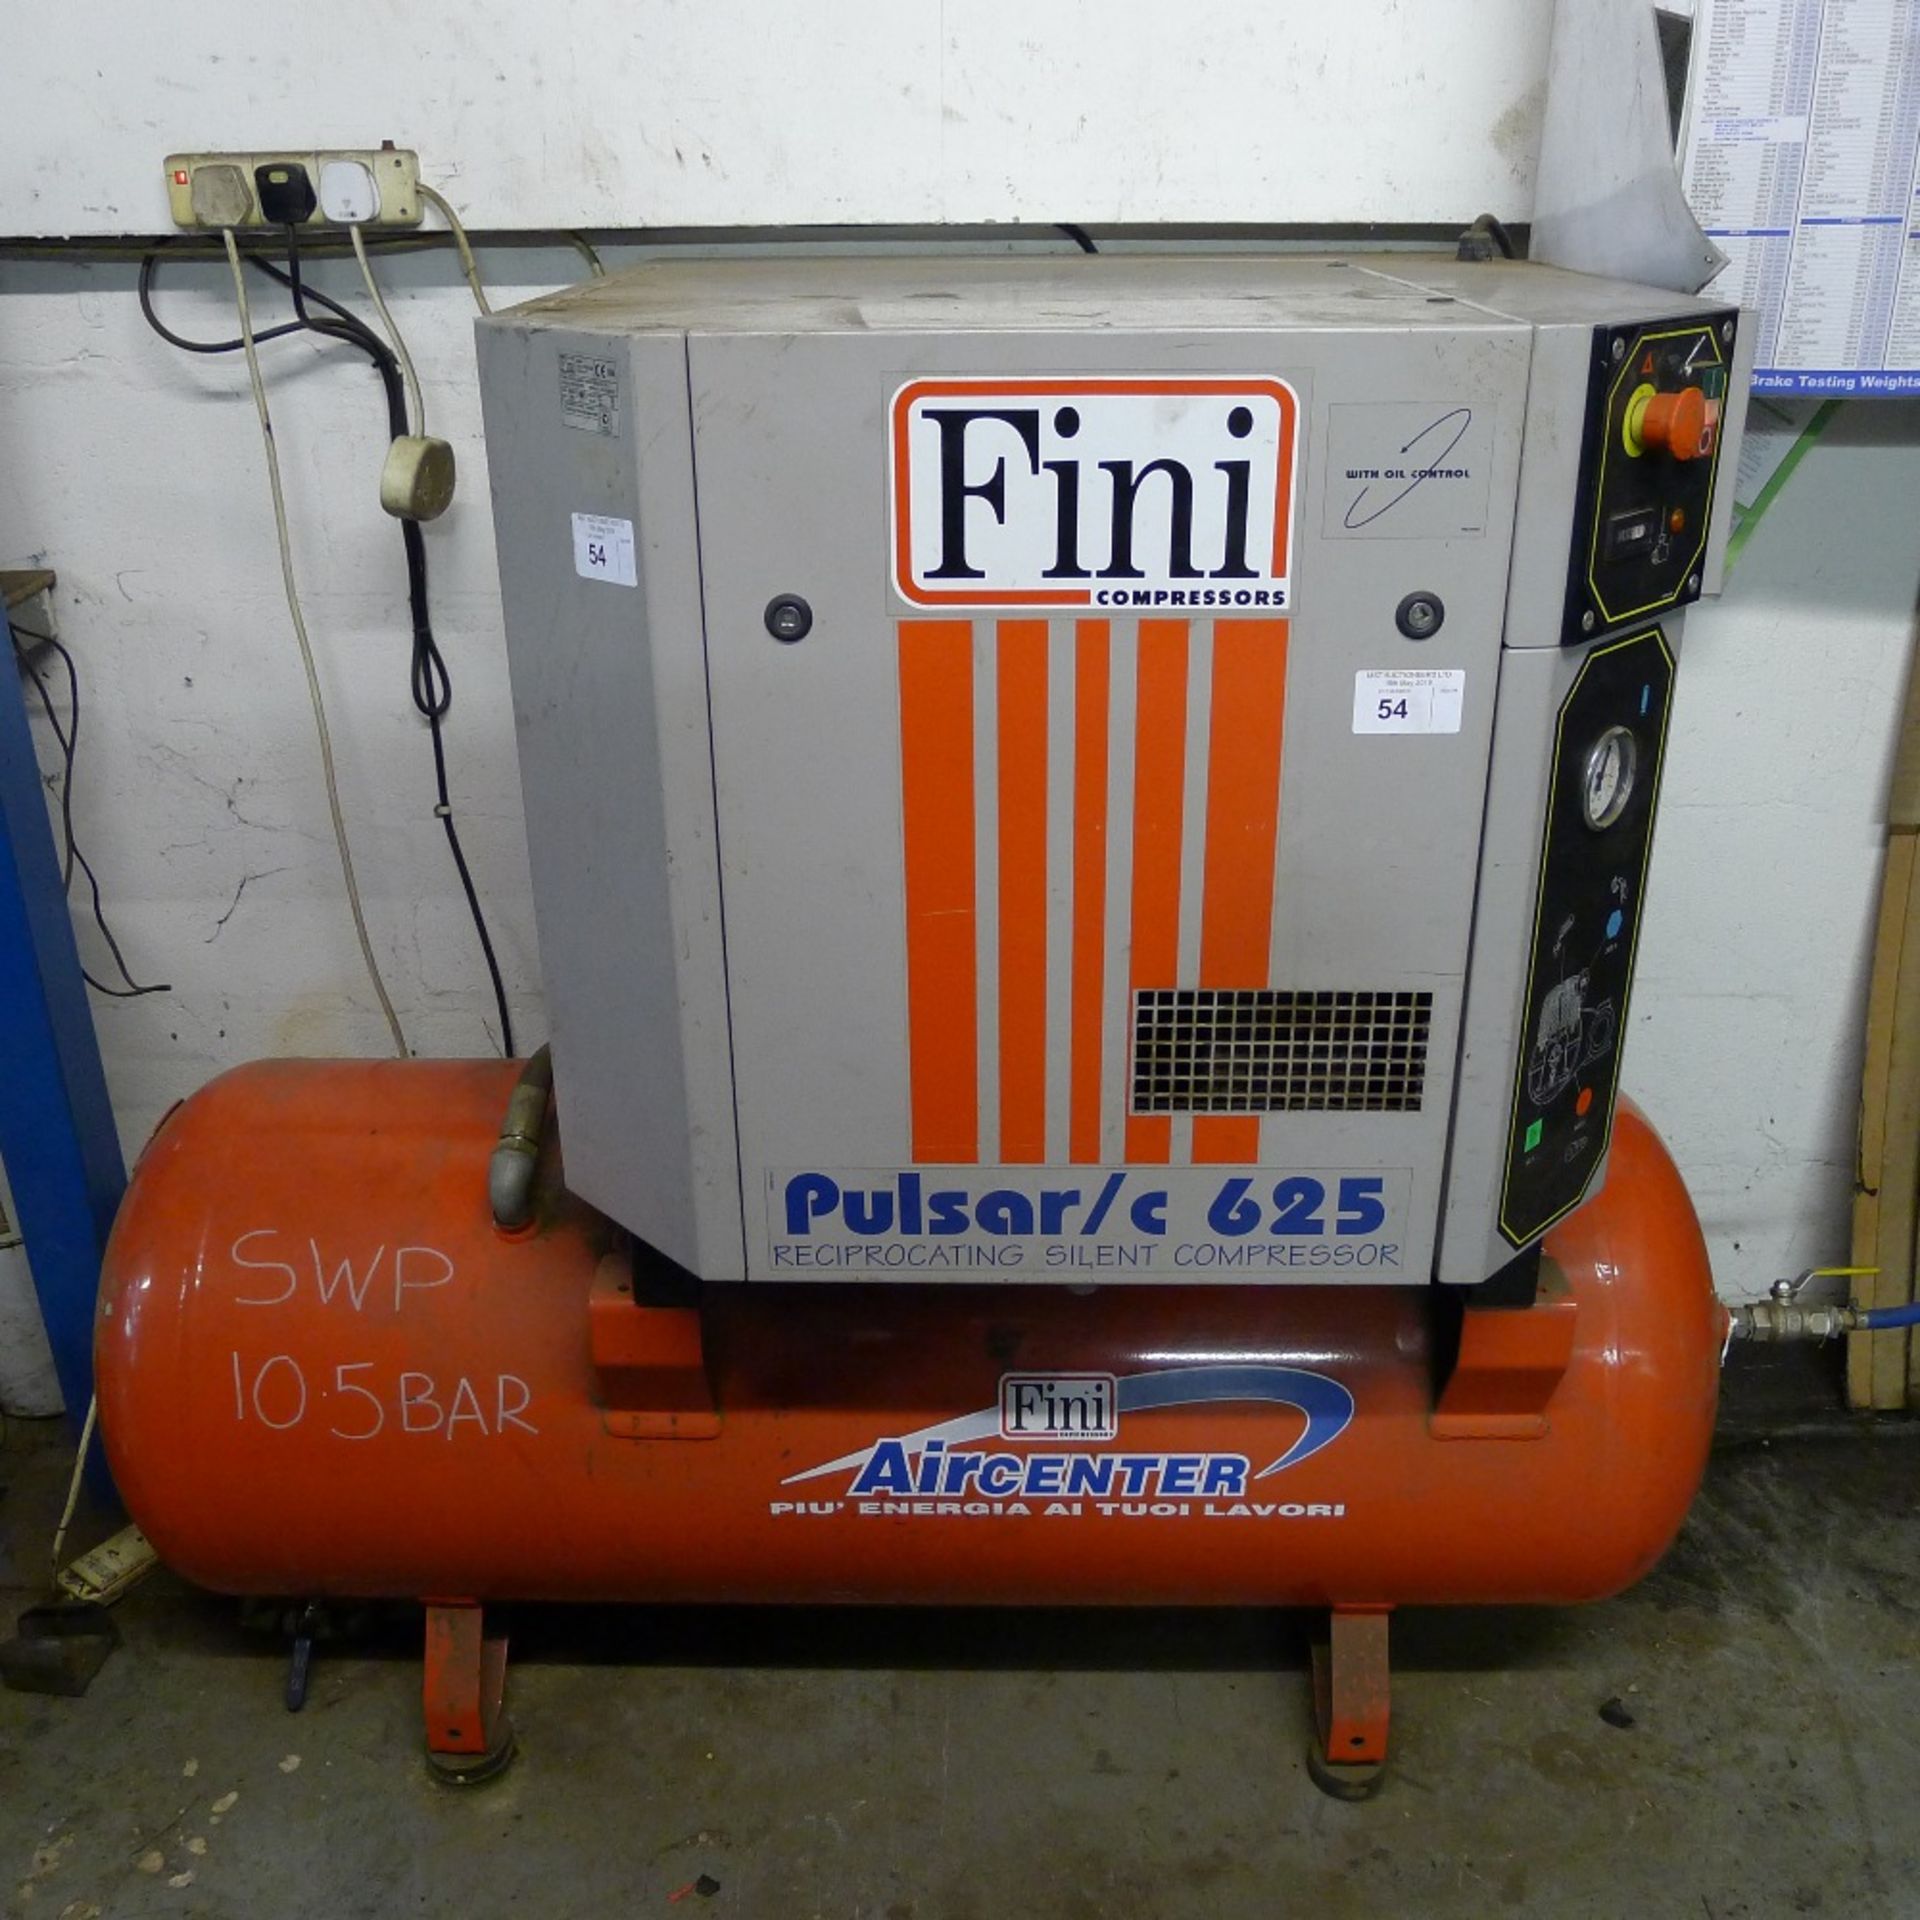 1 reciprocating silent compressor by Fini type Pulsar/C 625, 3ph, YOM 2000, 02336 hours, 10 bar /